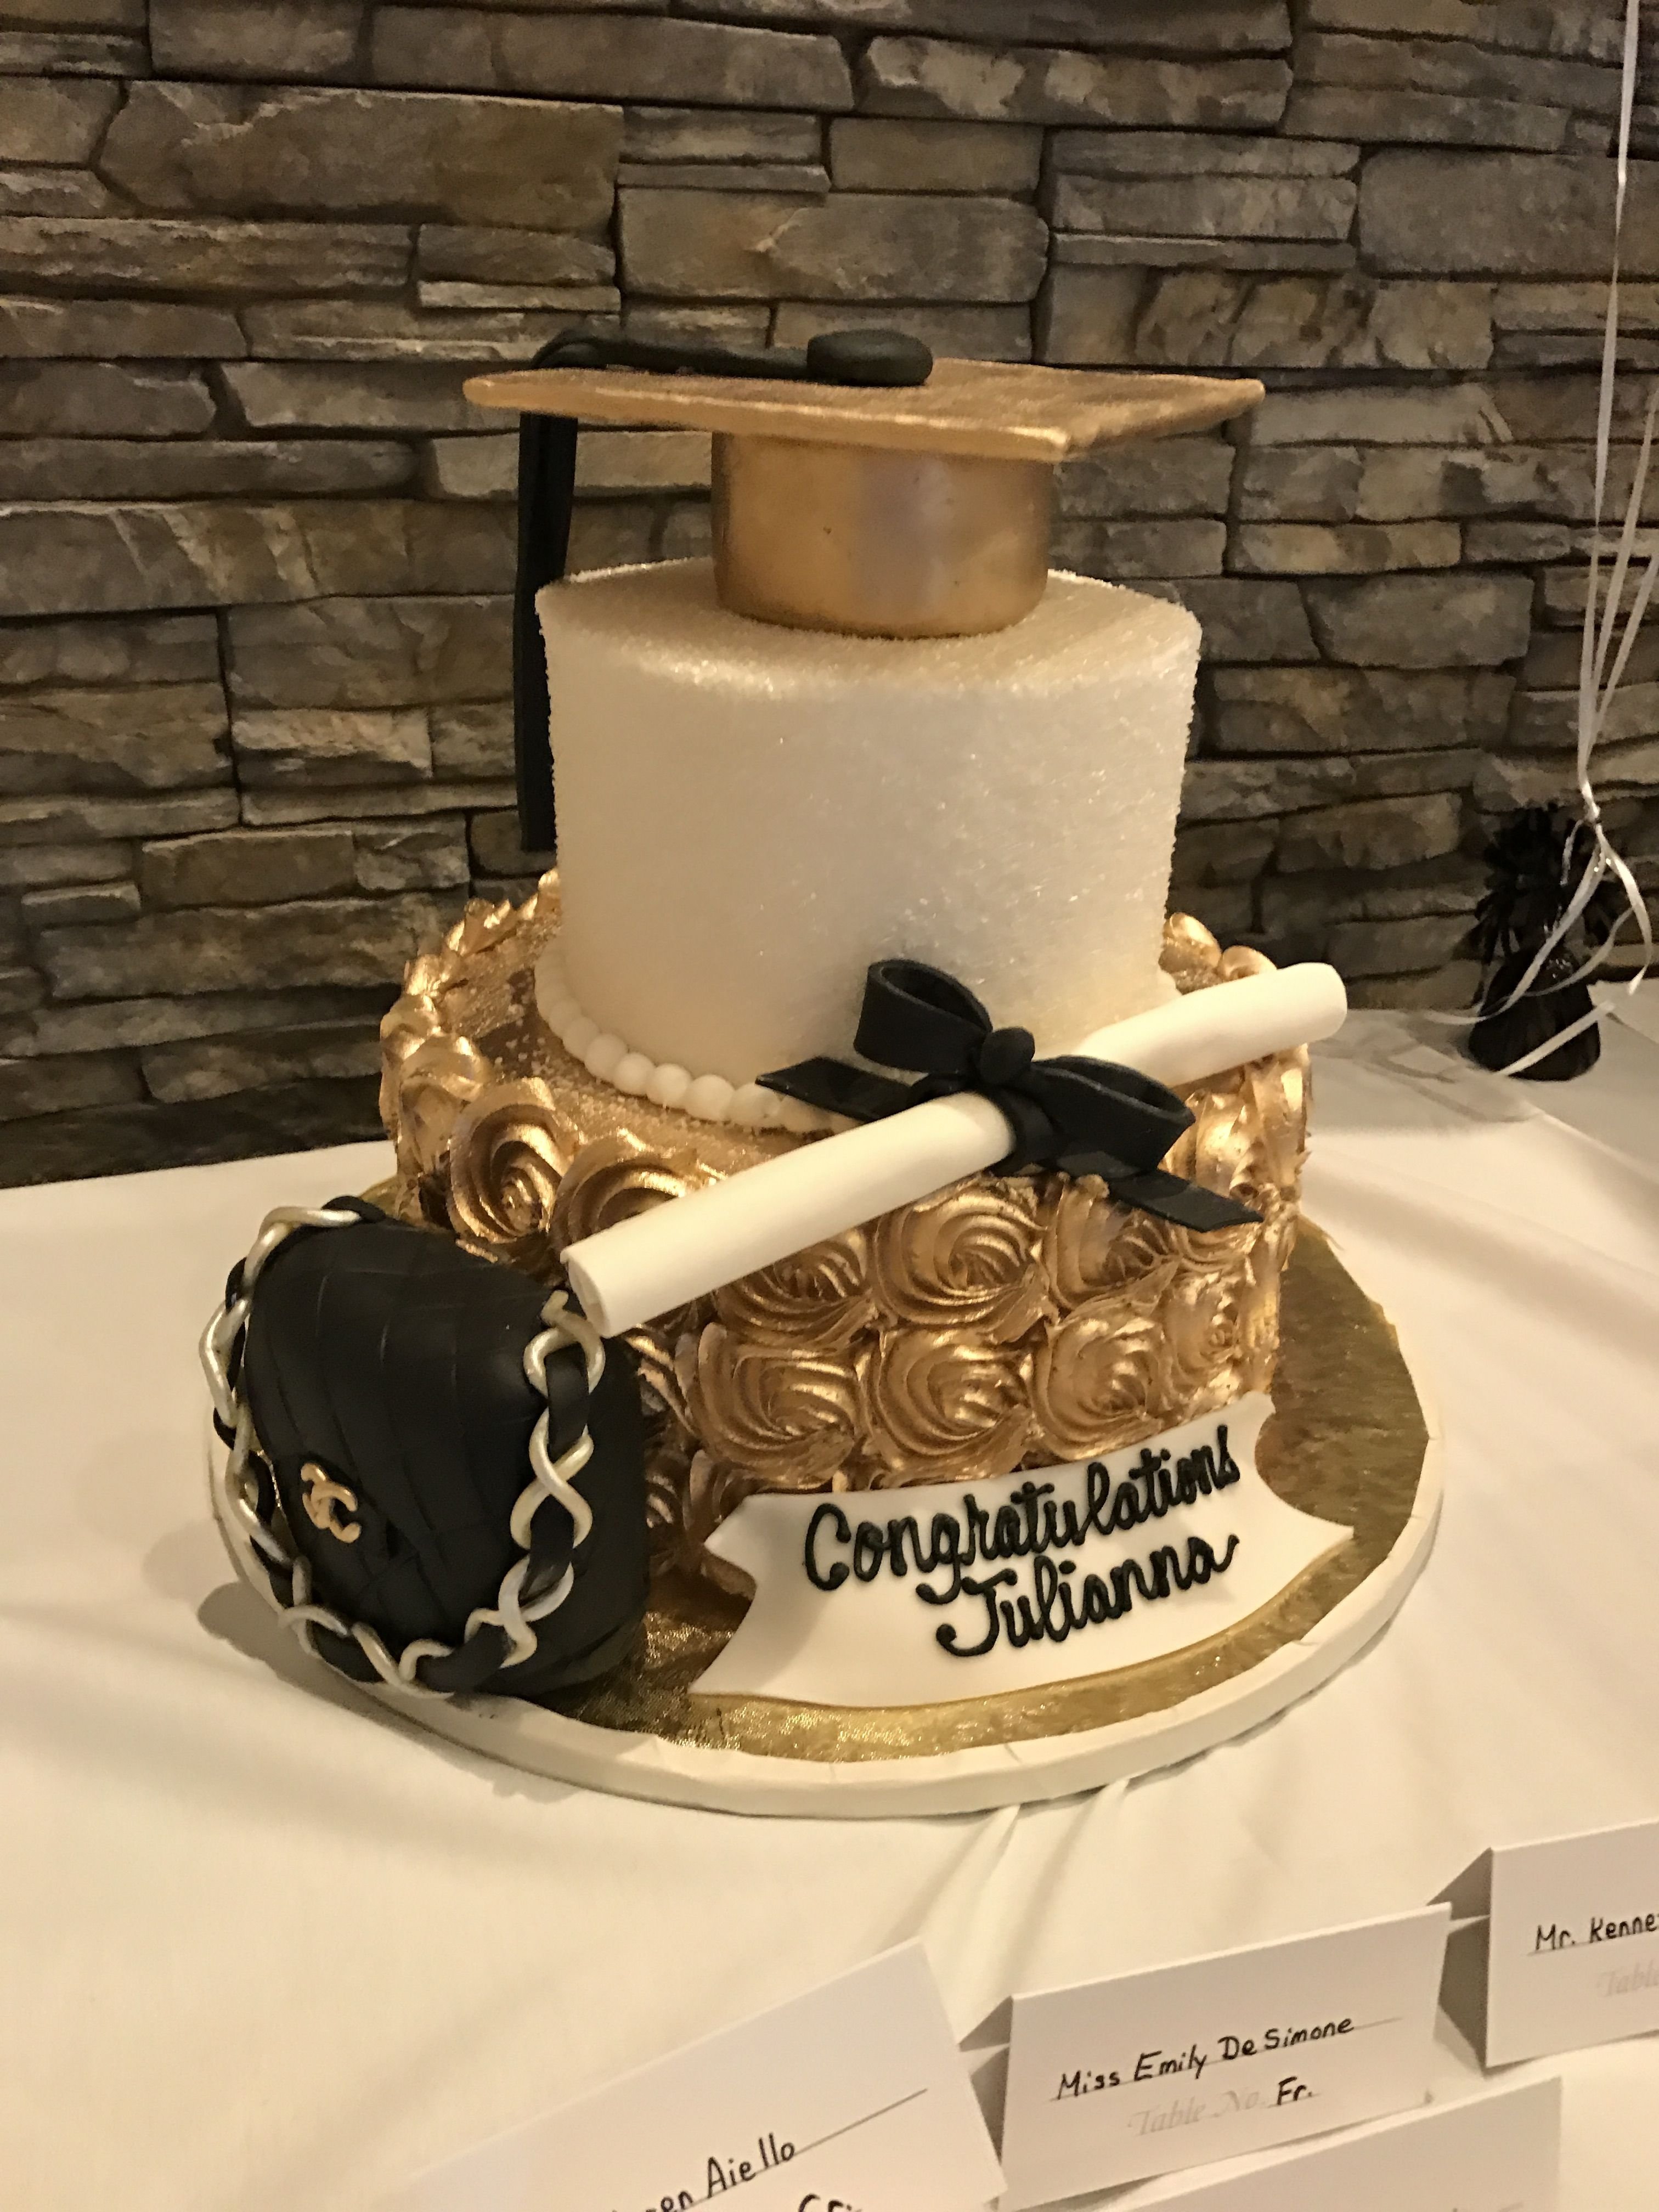 10 Most Popular Ideas For College Graduation Party college graduation cake for fashion major black white and gold 2022